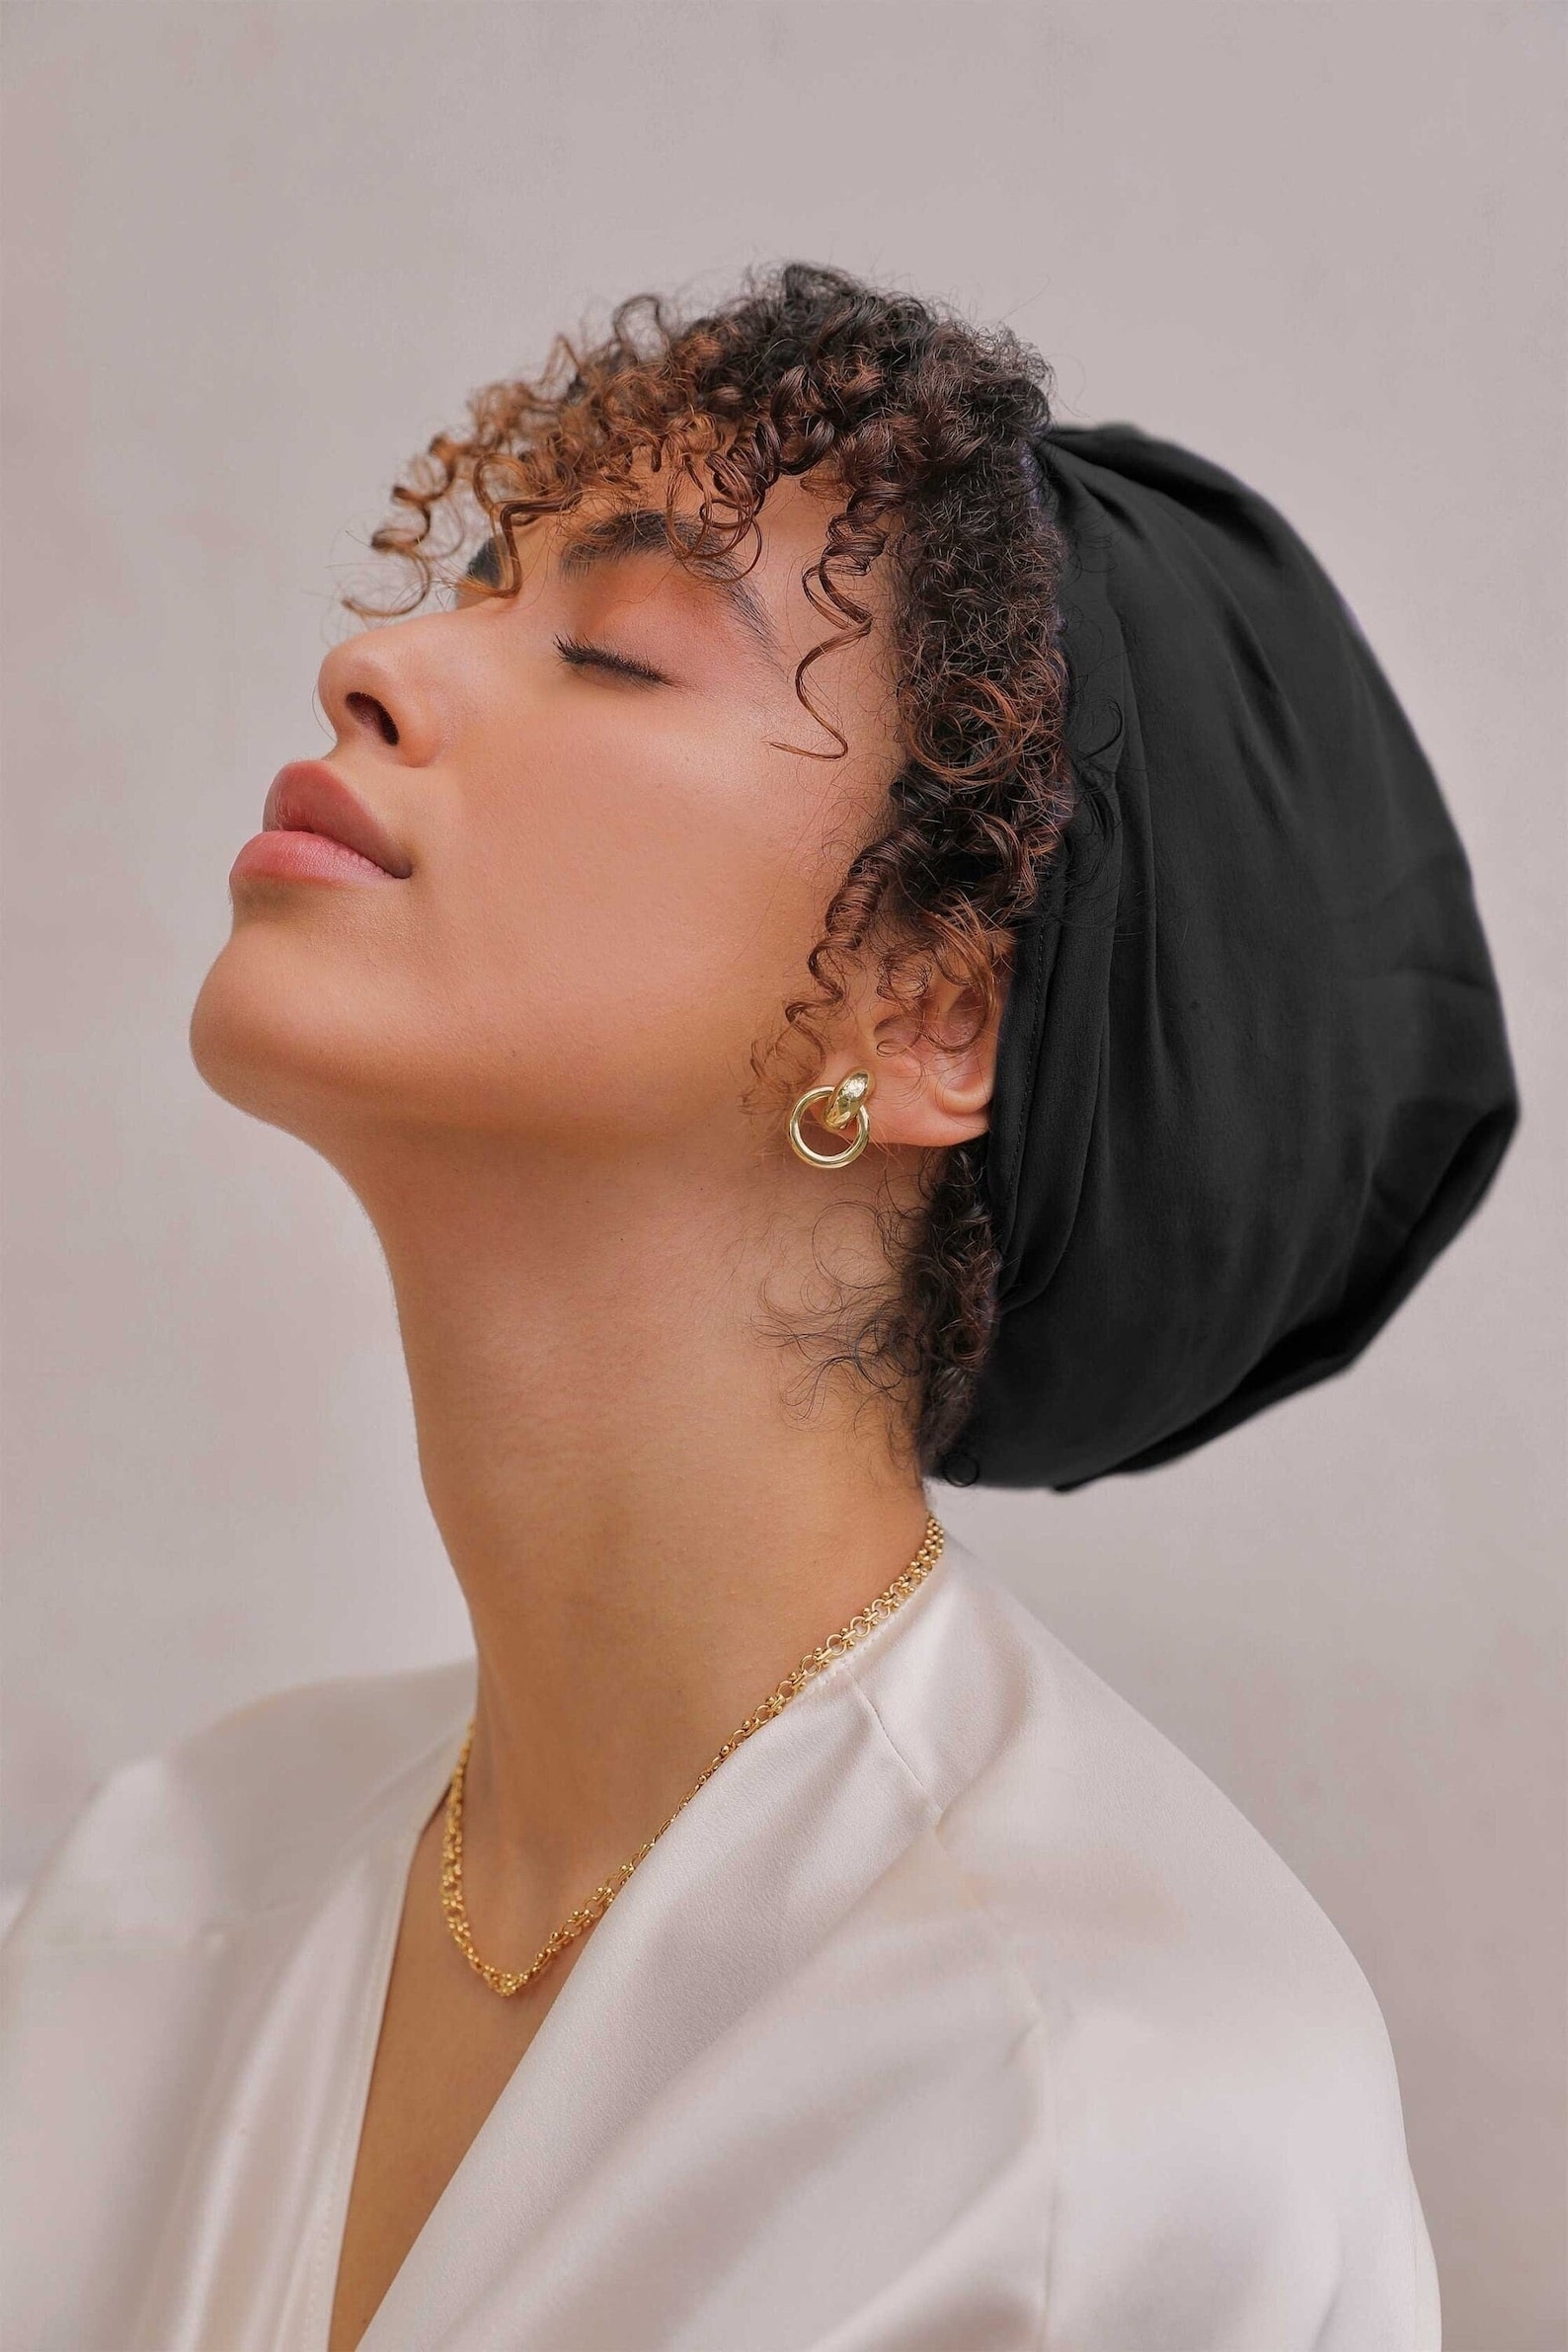 Person with curly hair wearing a silk turban and hoop earrings, eyes closed, head tilted upwards